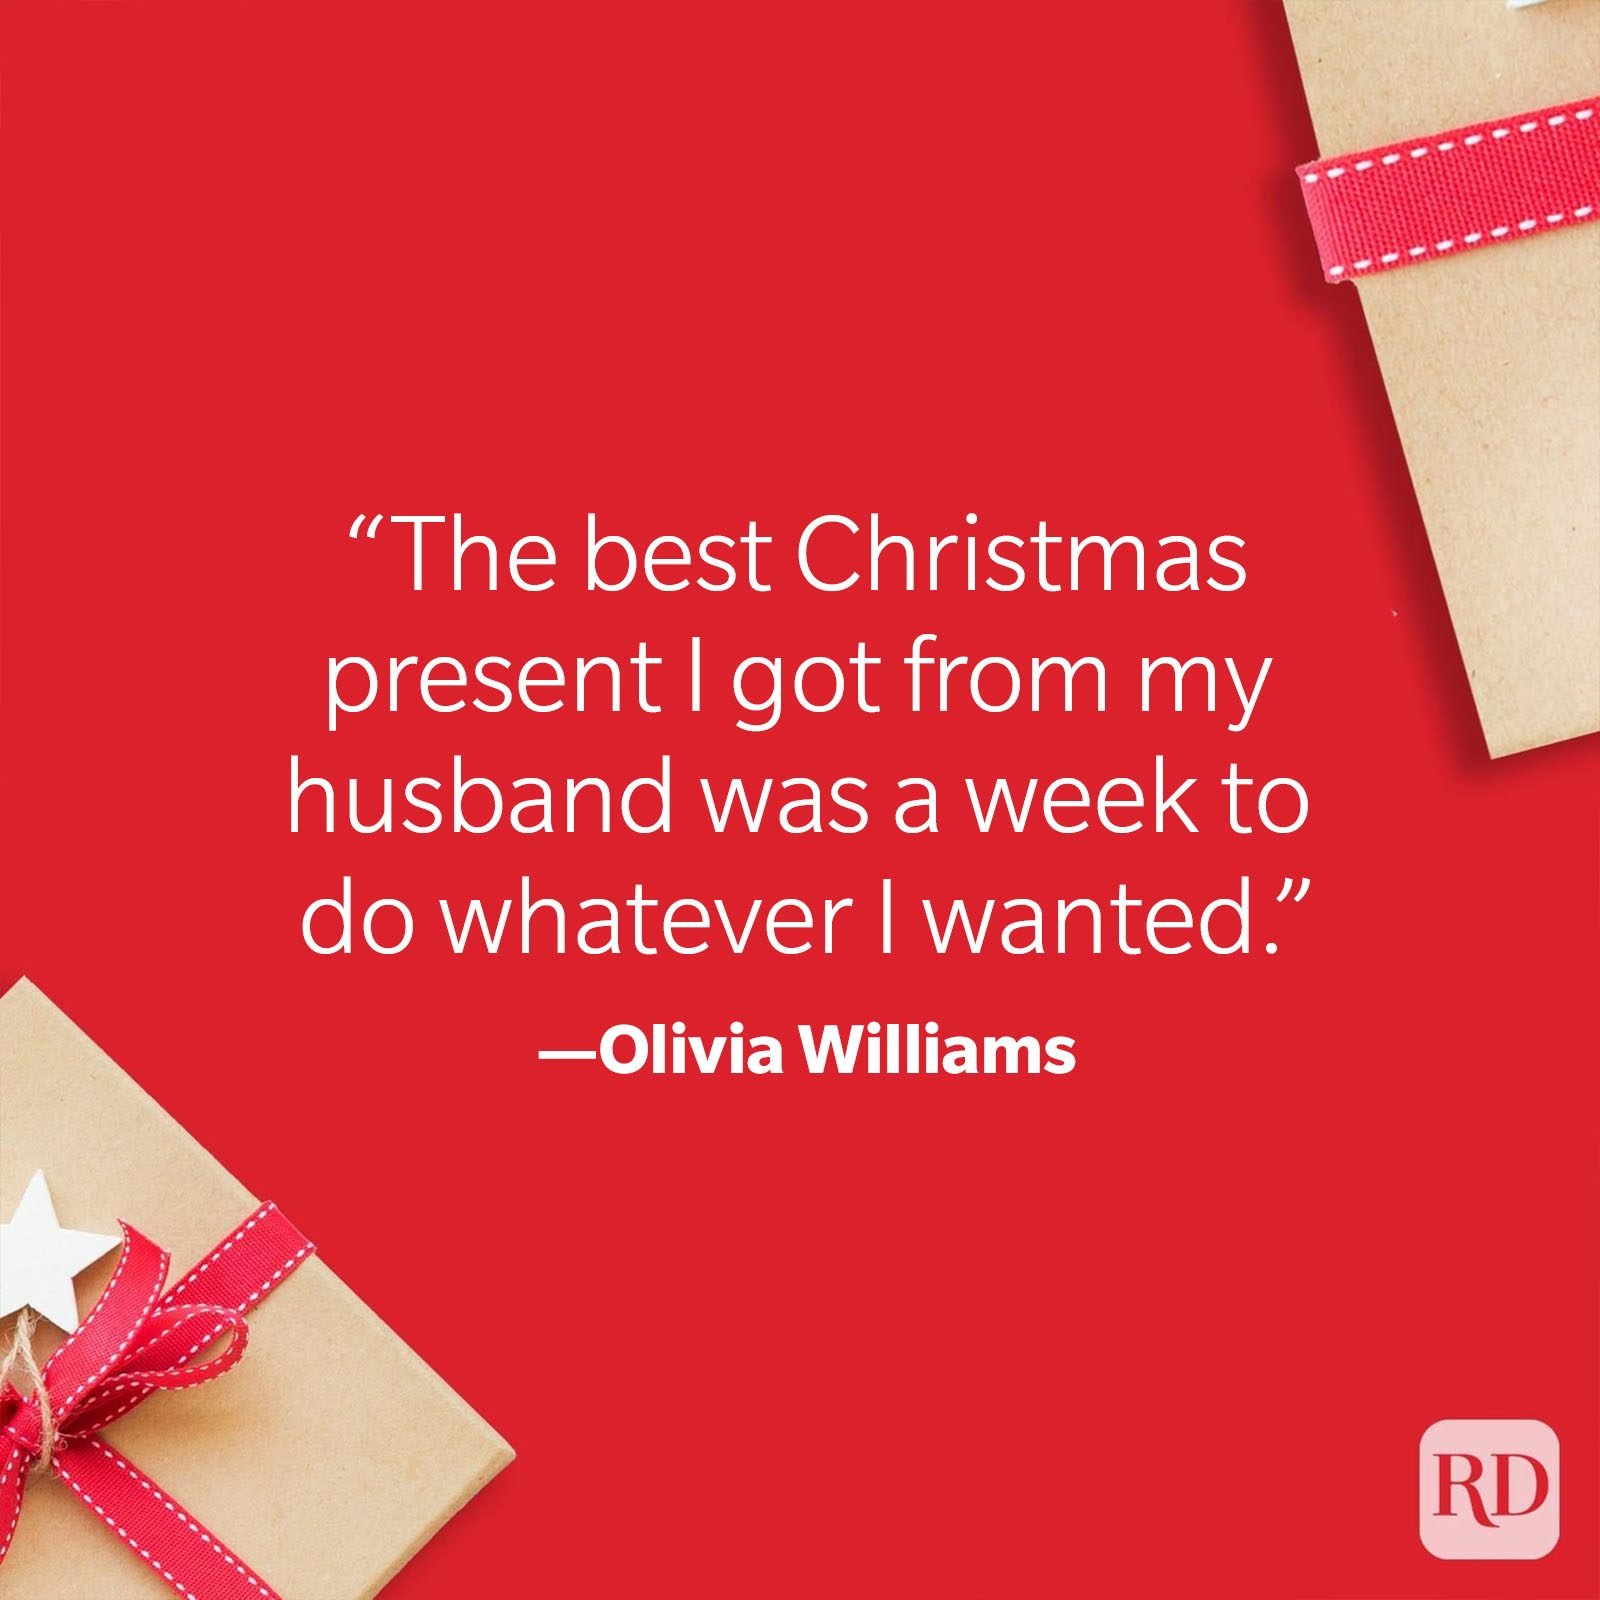 Olivia Williams Funny Christmas Quotes